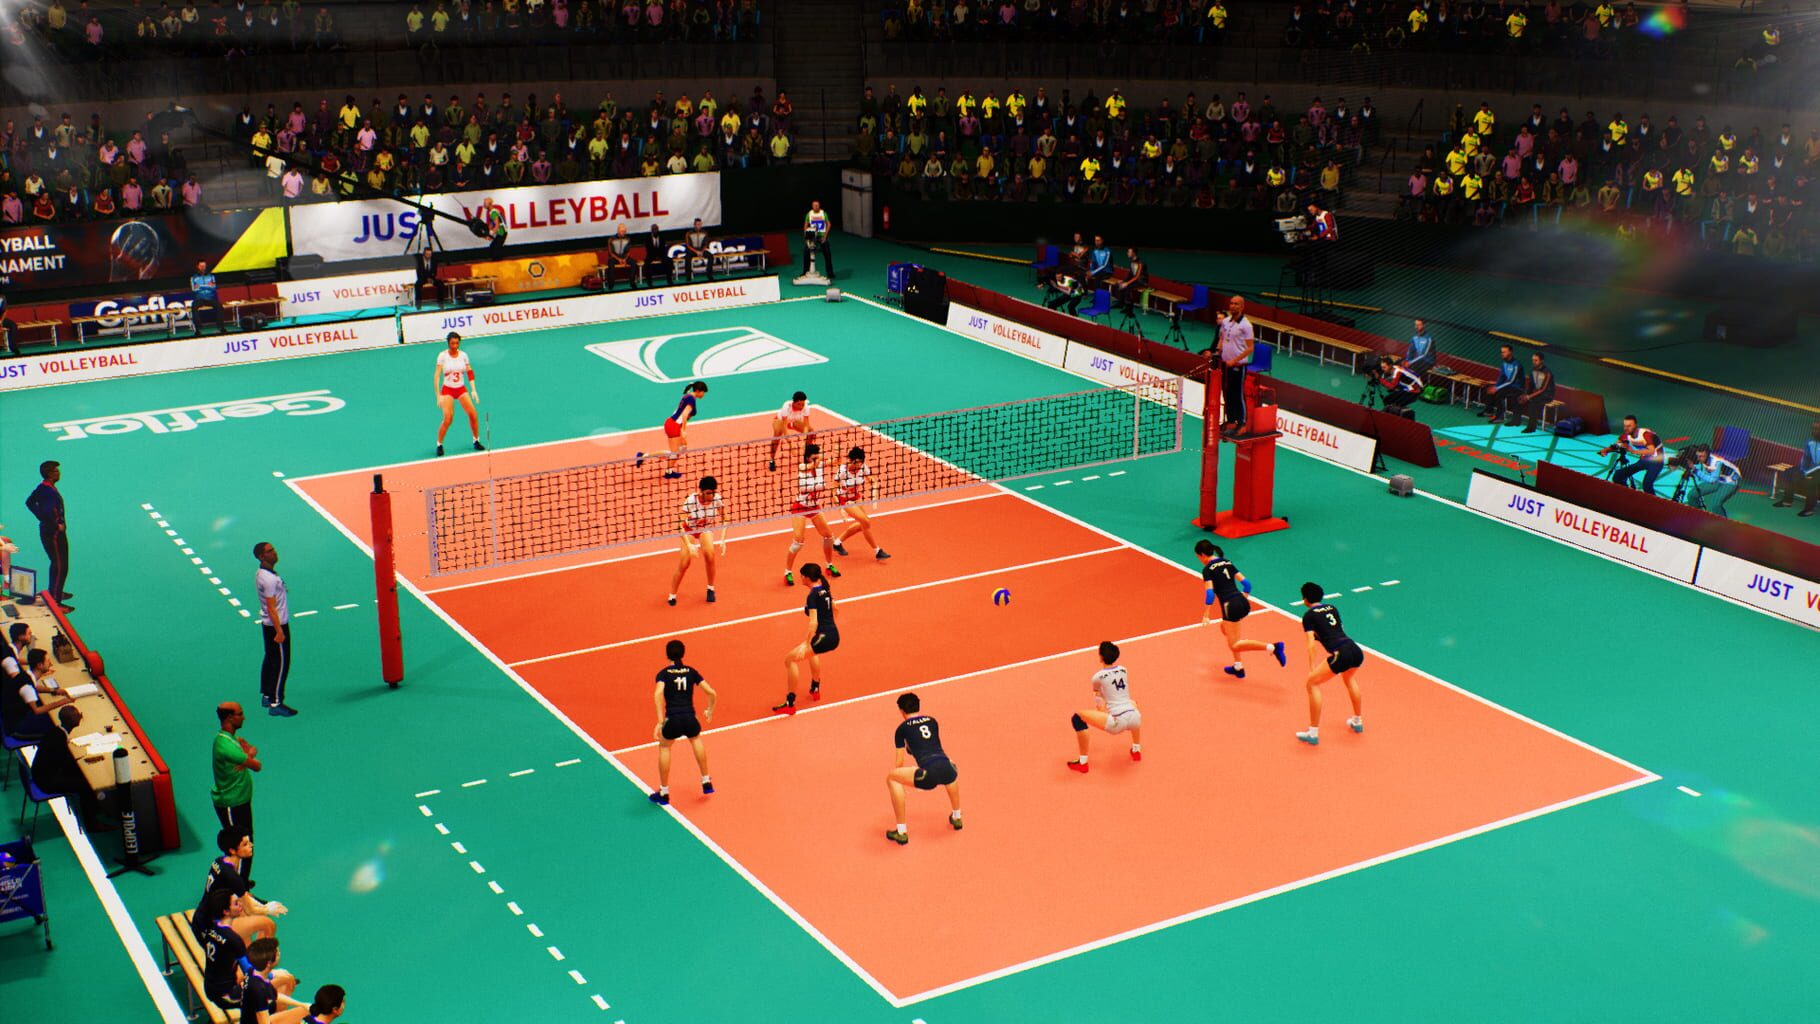 Spike Volleyball Image